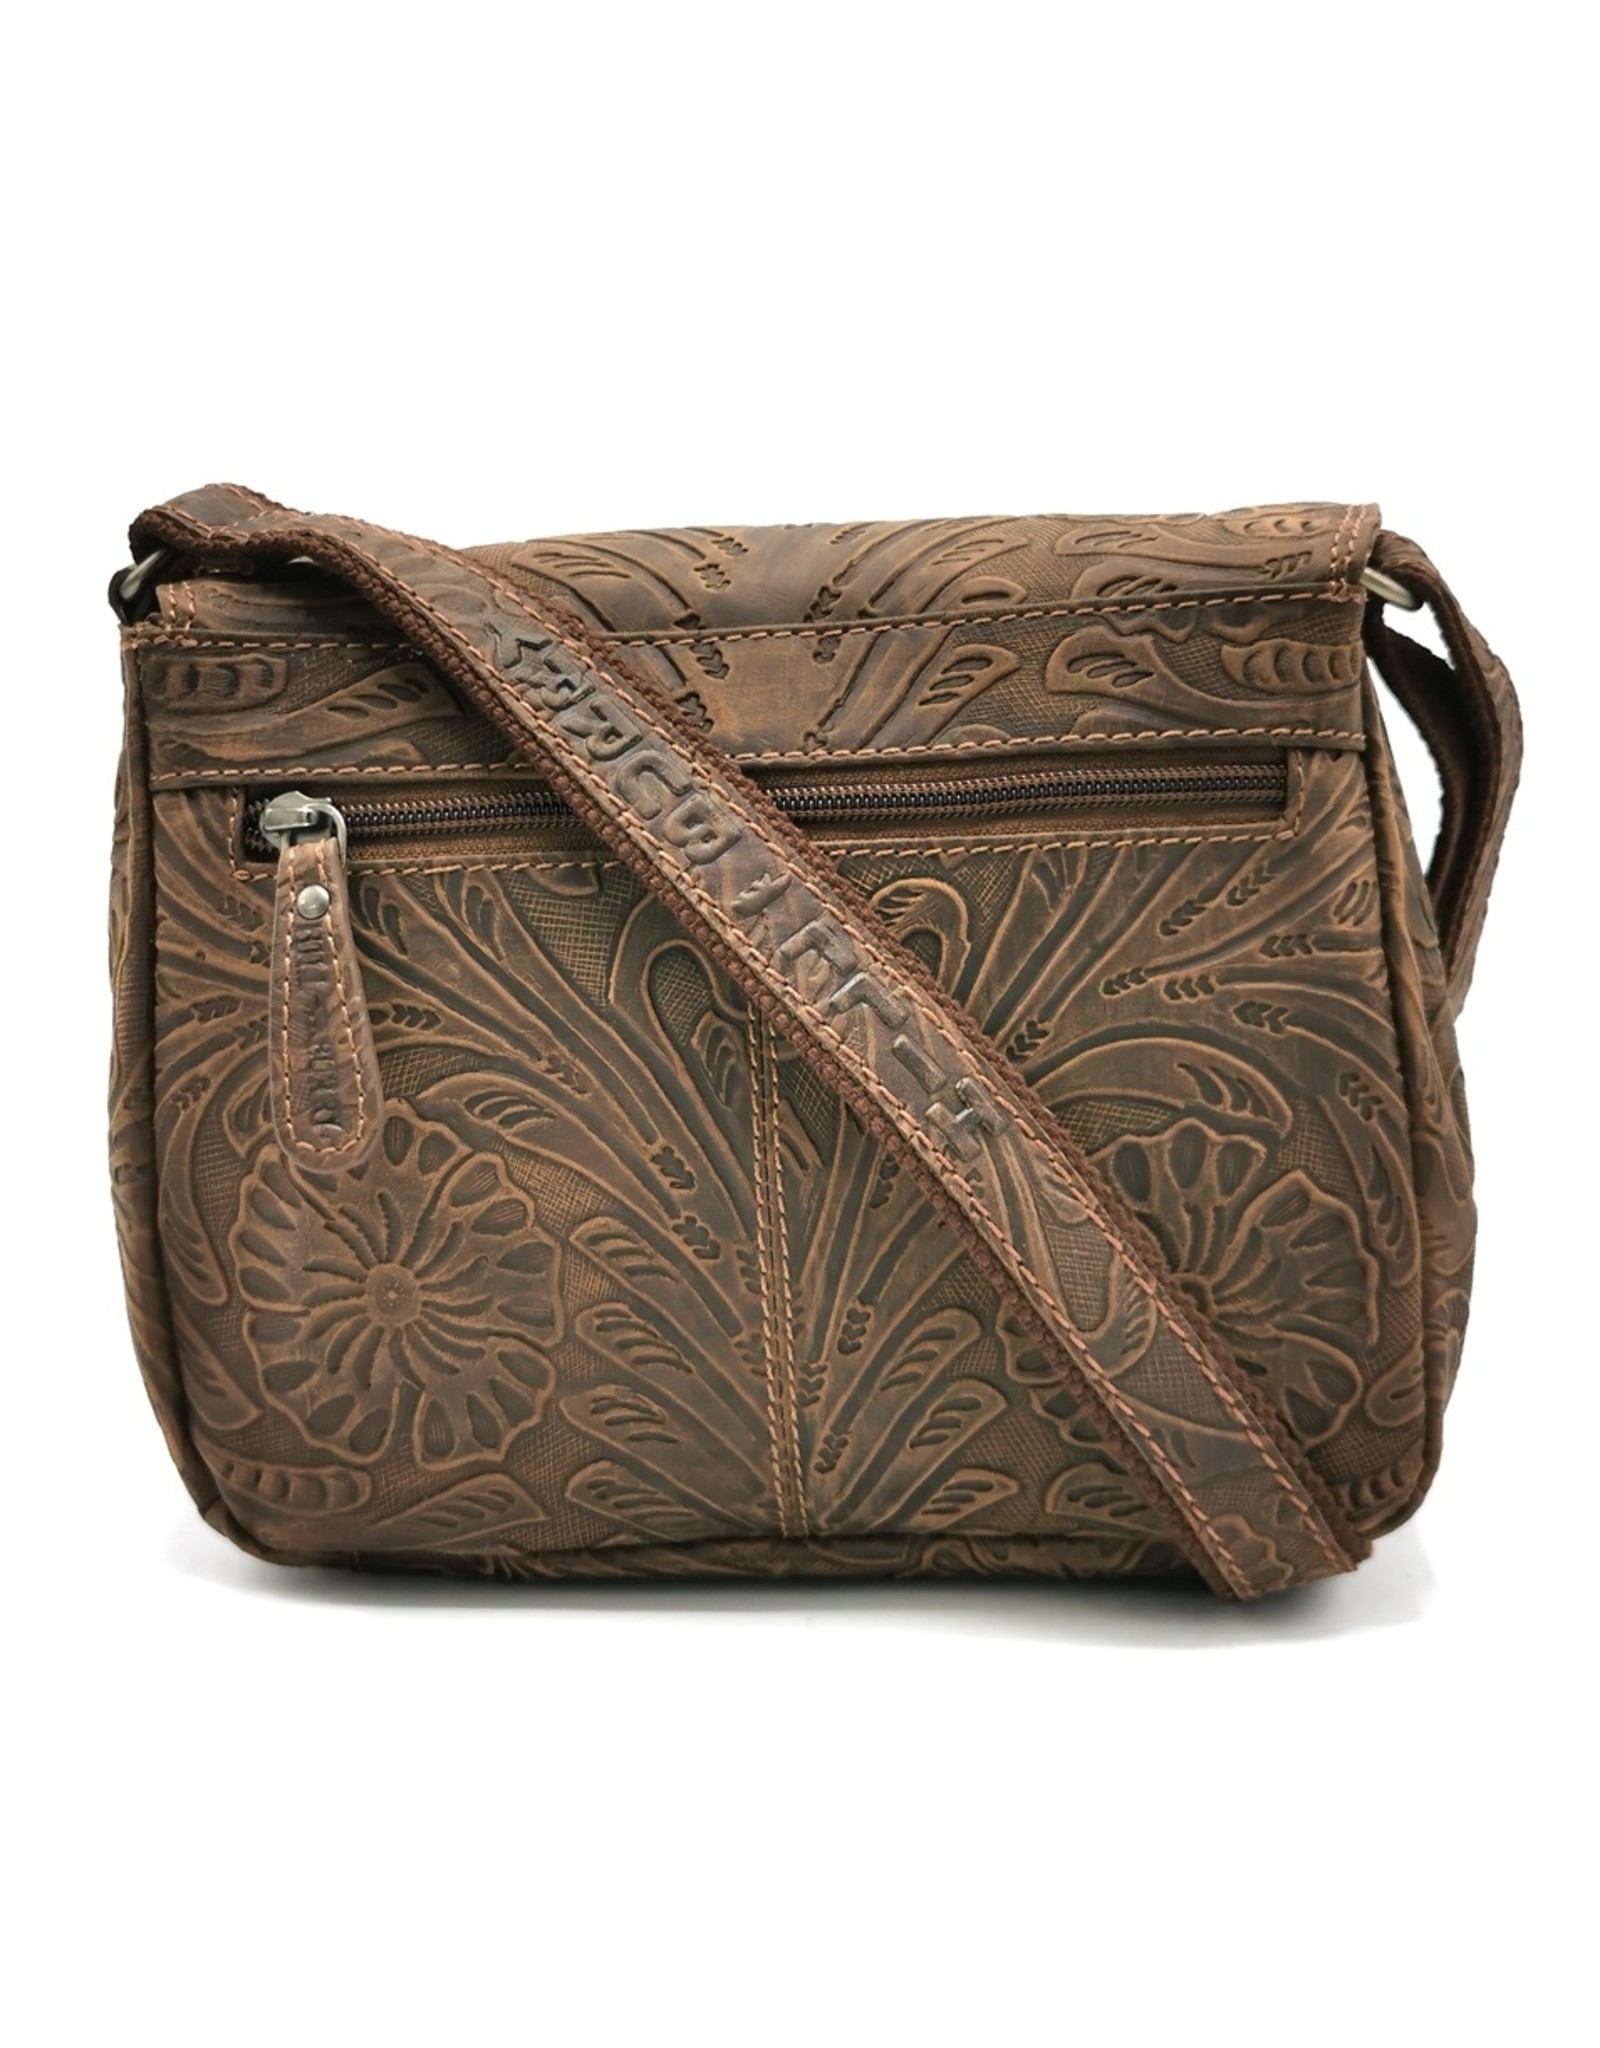 HillBurry Leather bags - Hillburry Shoulder bag with Embossed Flowers Brown